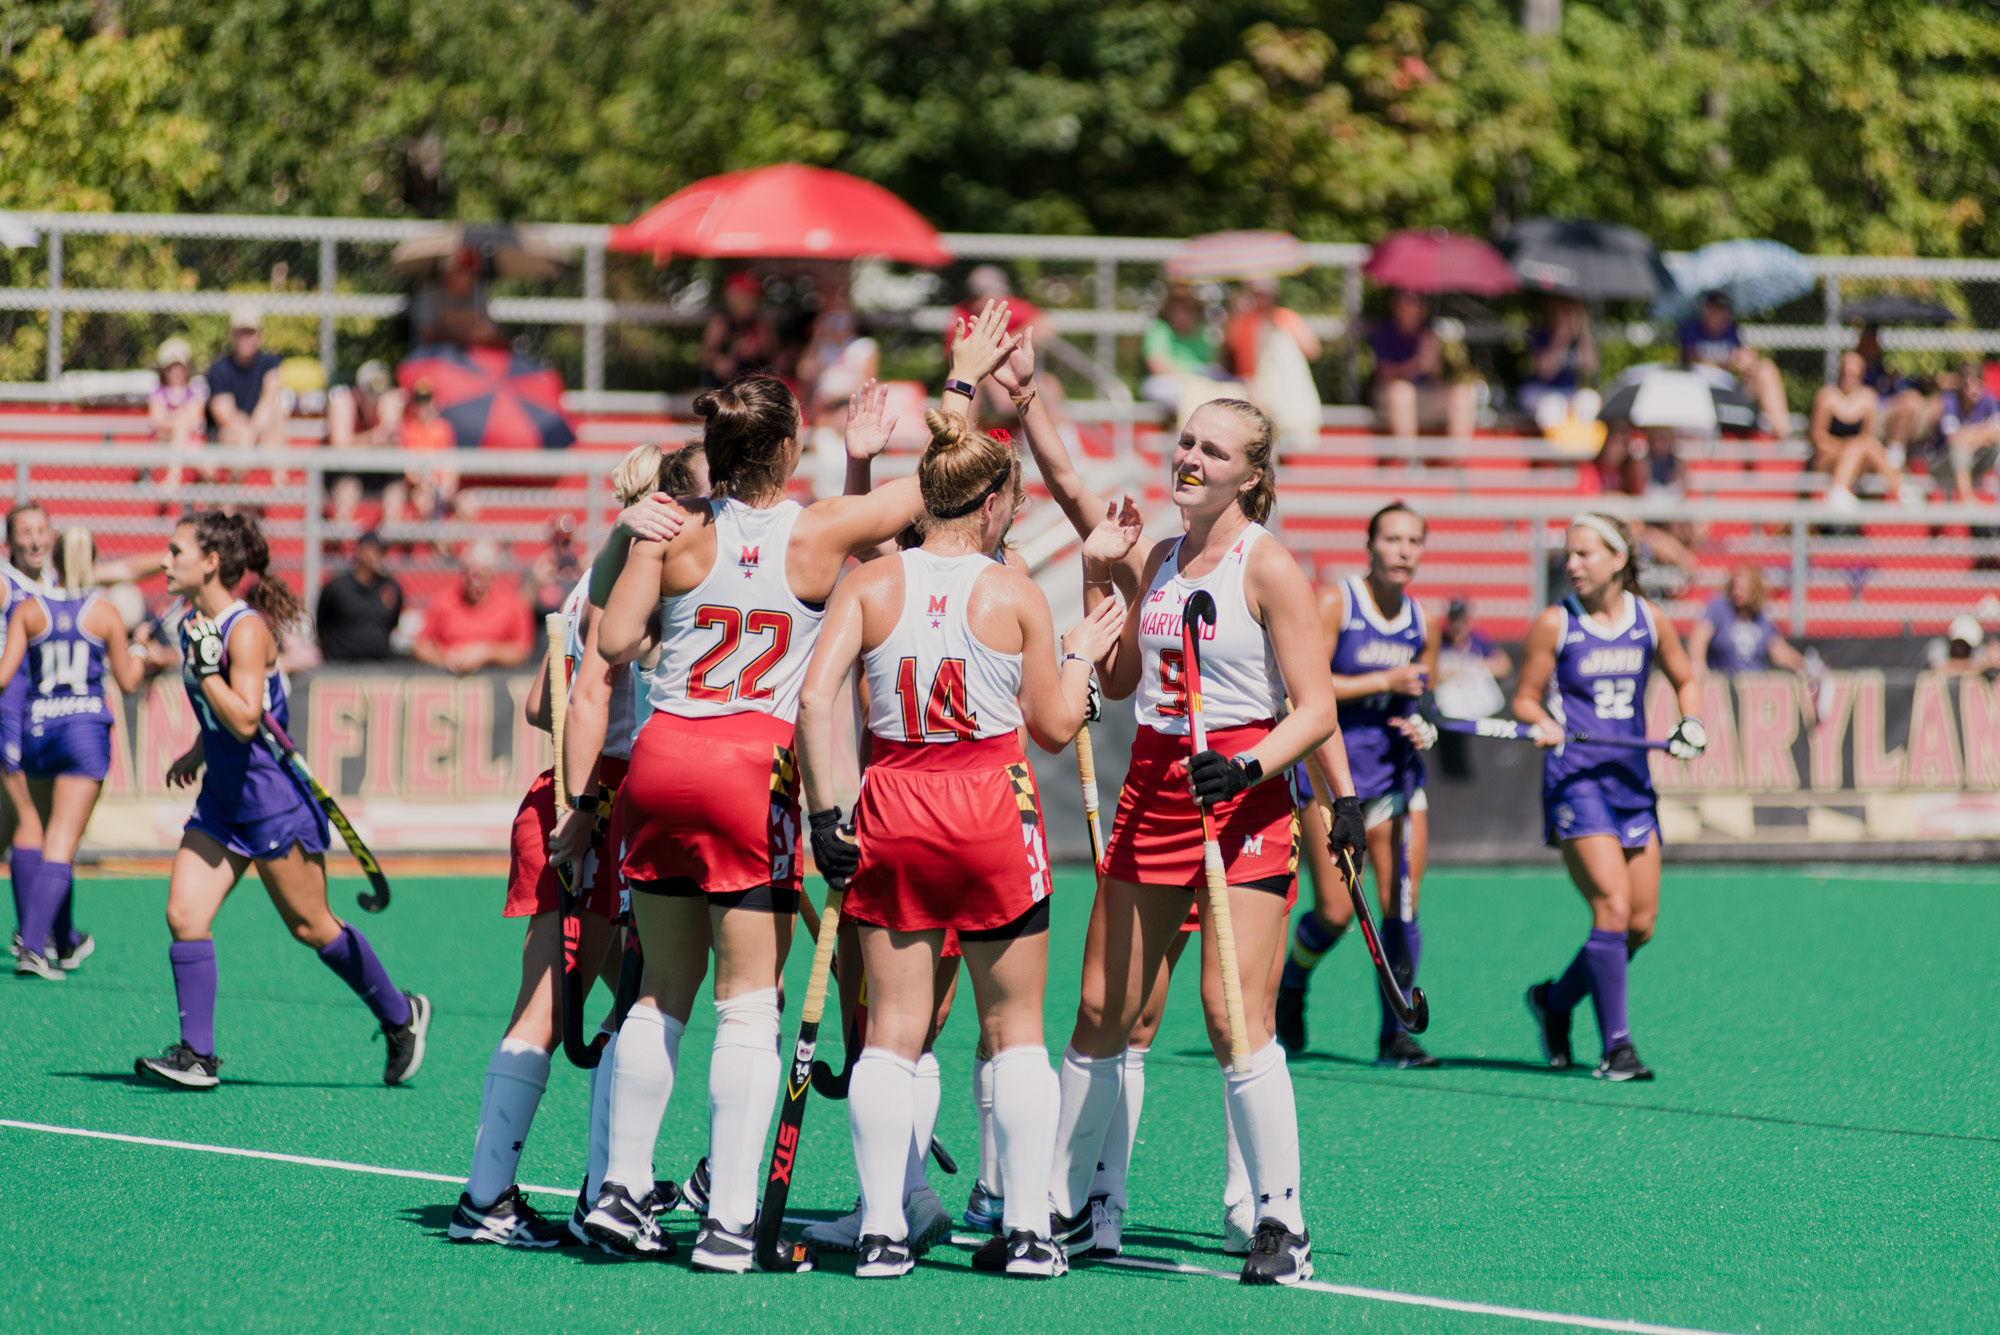 Noelle Frost went from goalie to assistant coach for Maryland